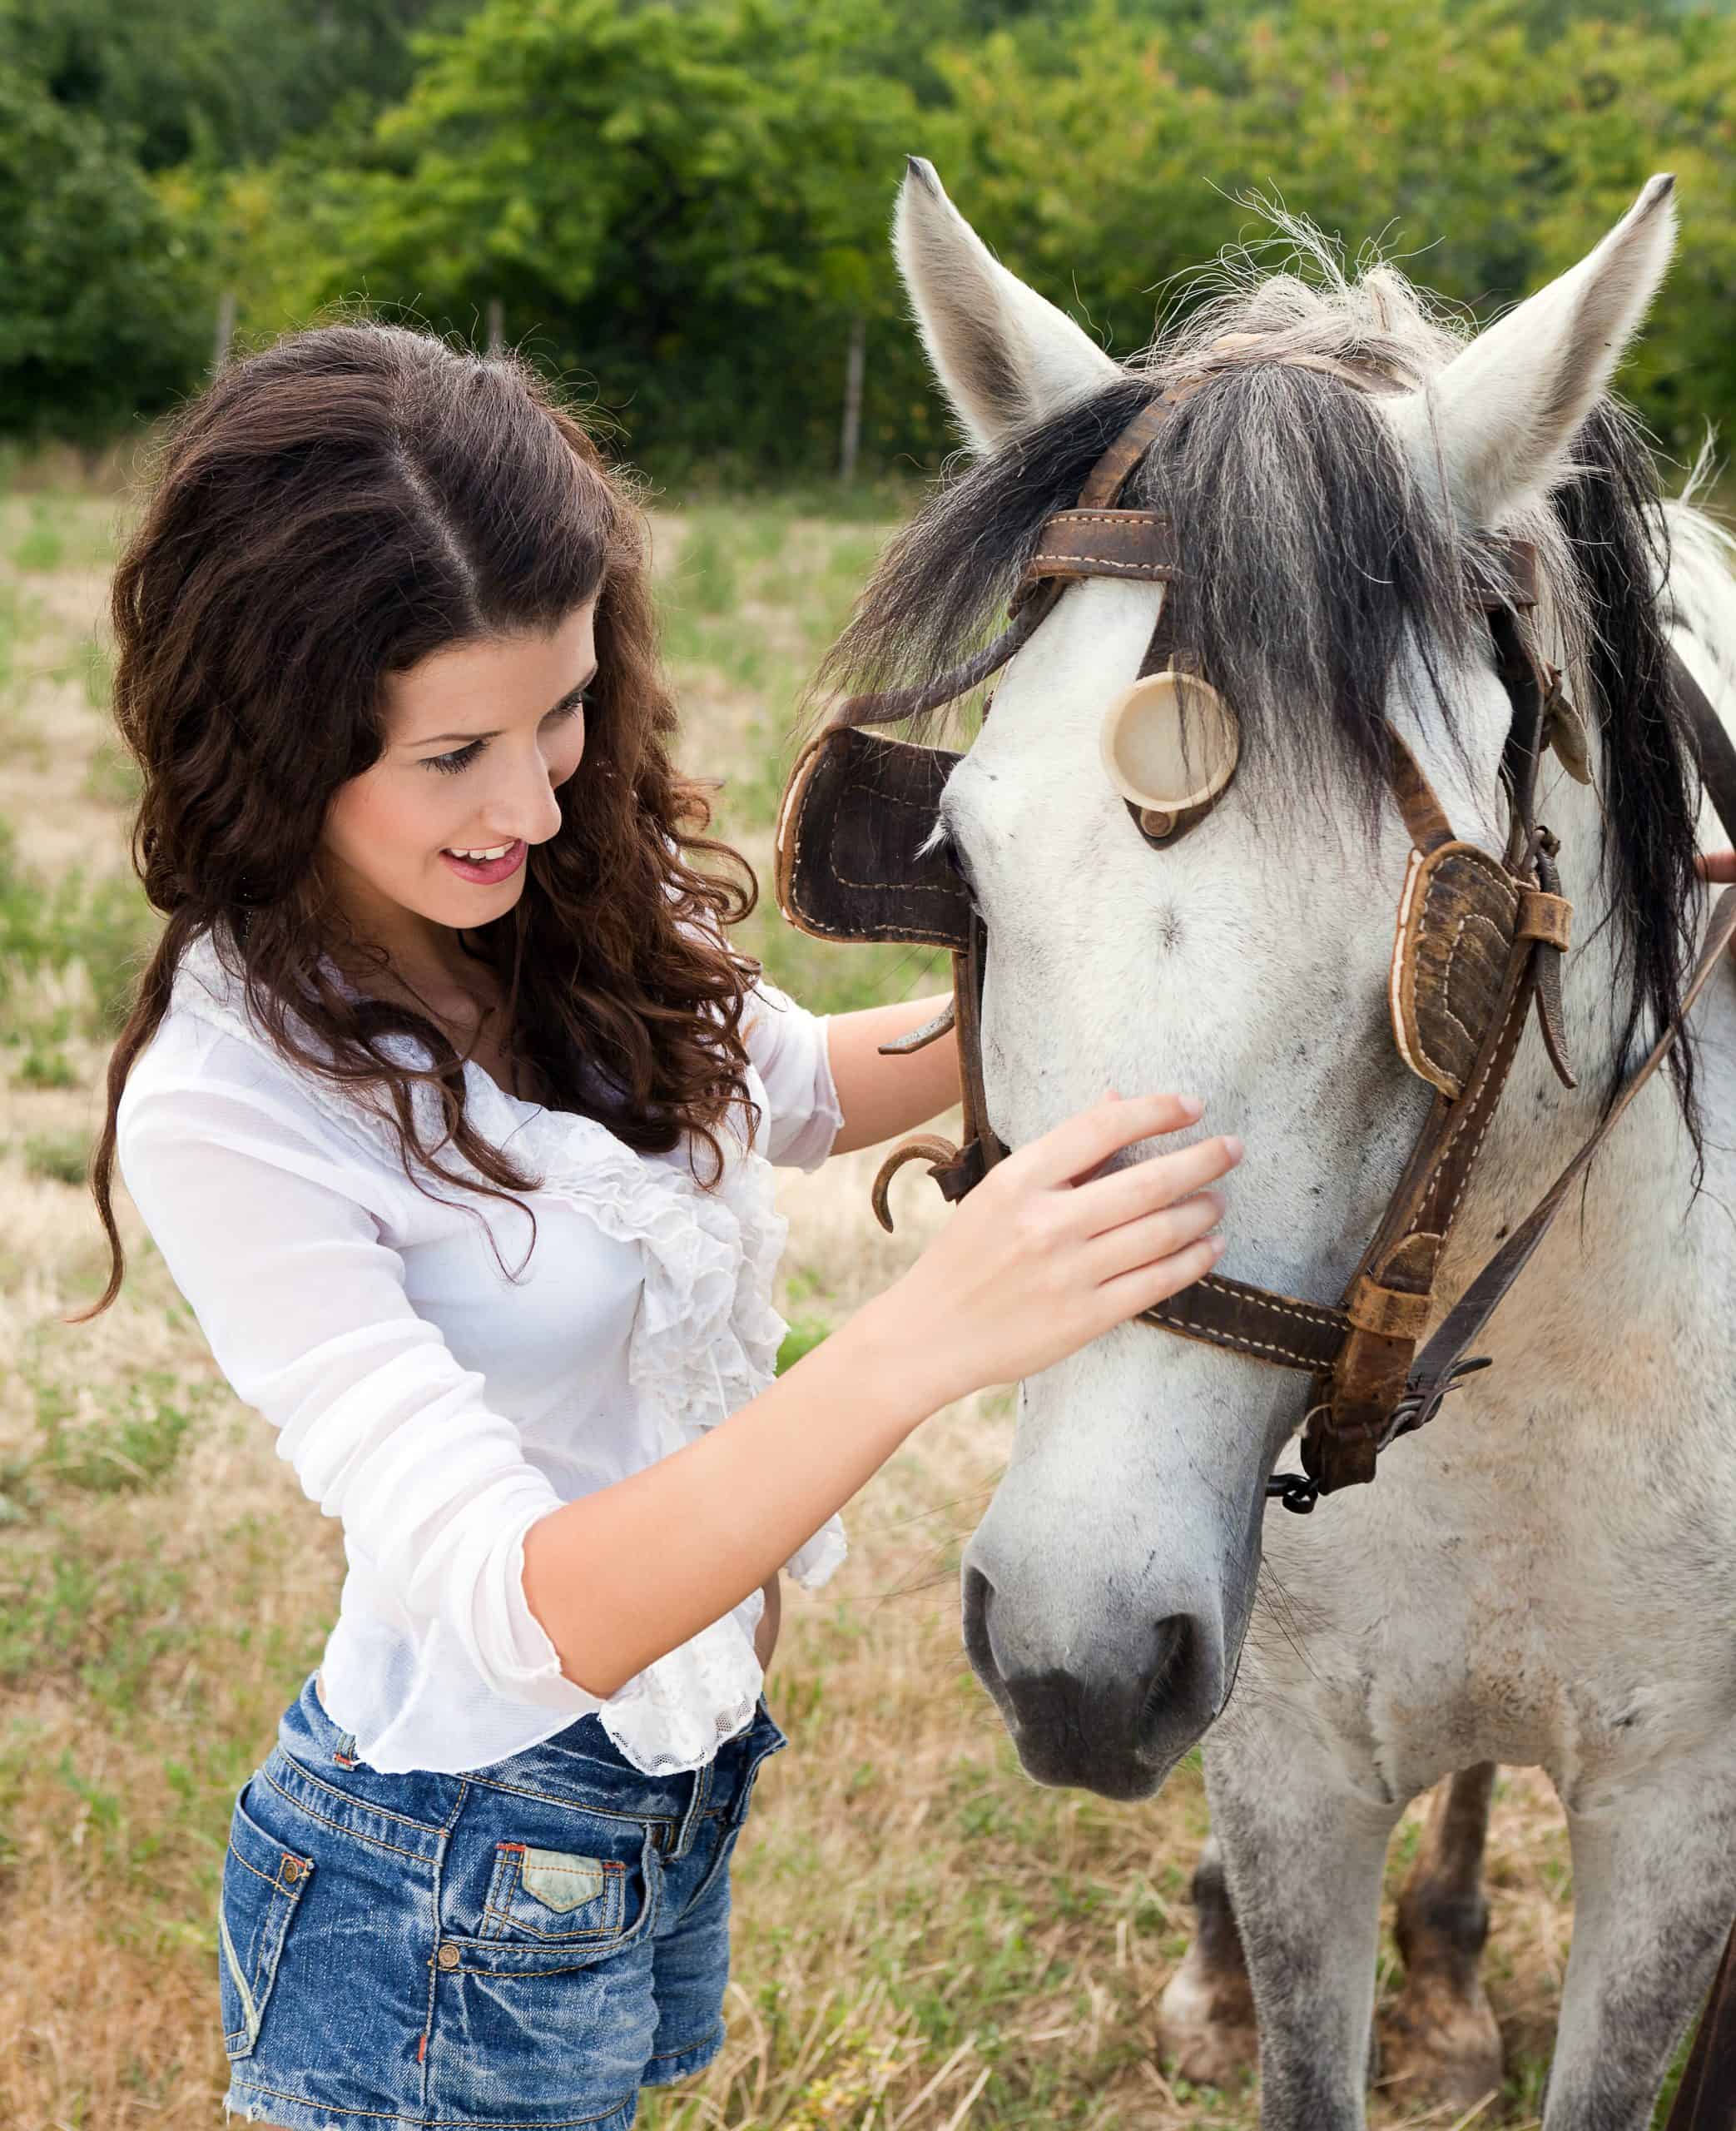 Smiling woman meeting a farm horse in a meadow